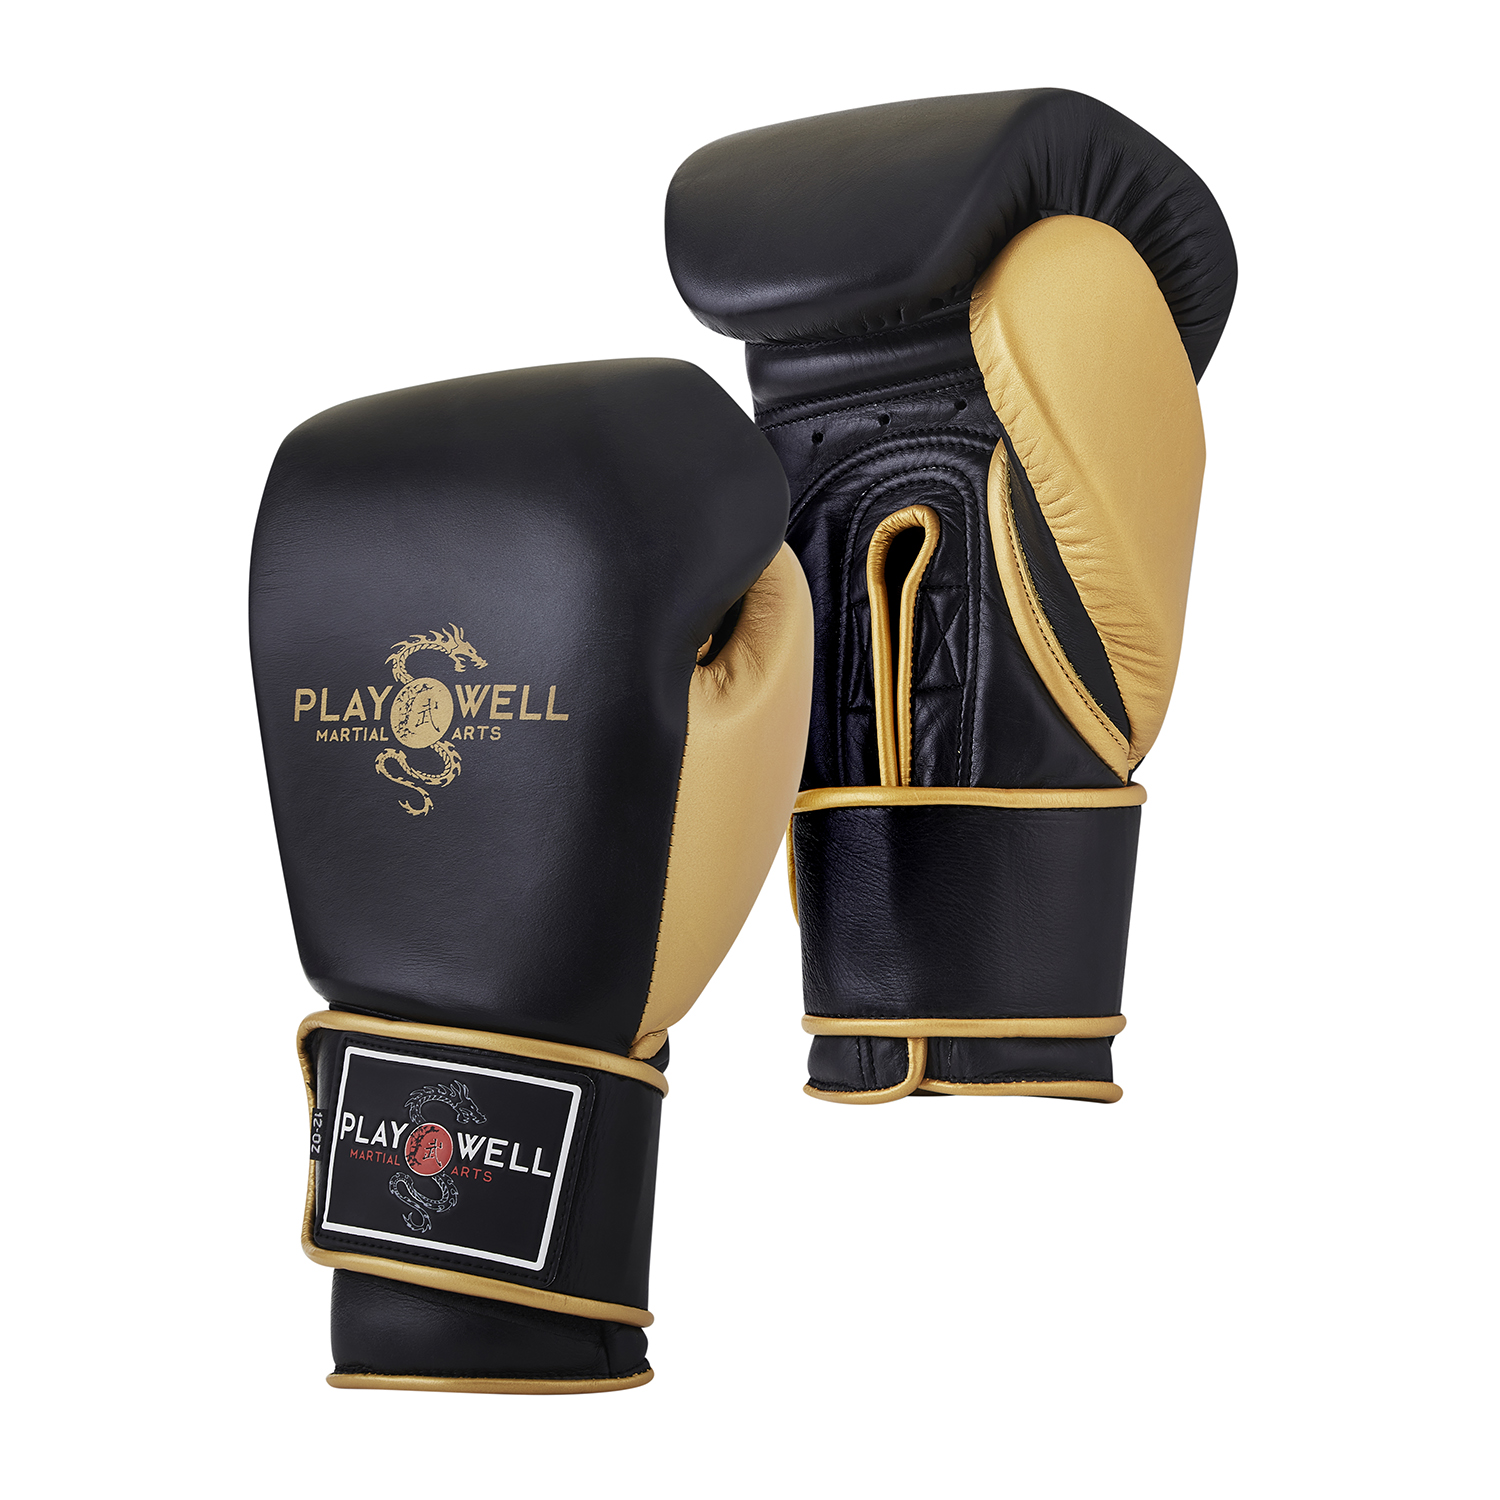 Playwell Premium \"Champion\" Leather Boxing Sparring Gloves